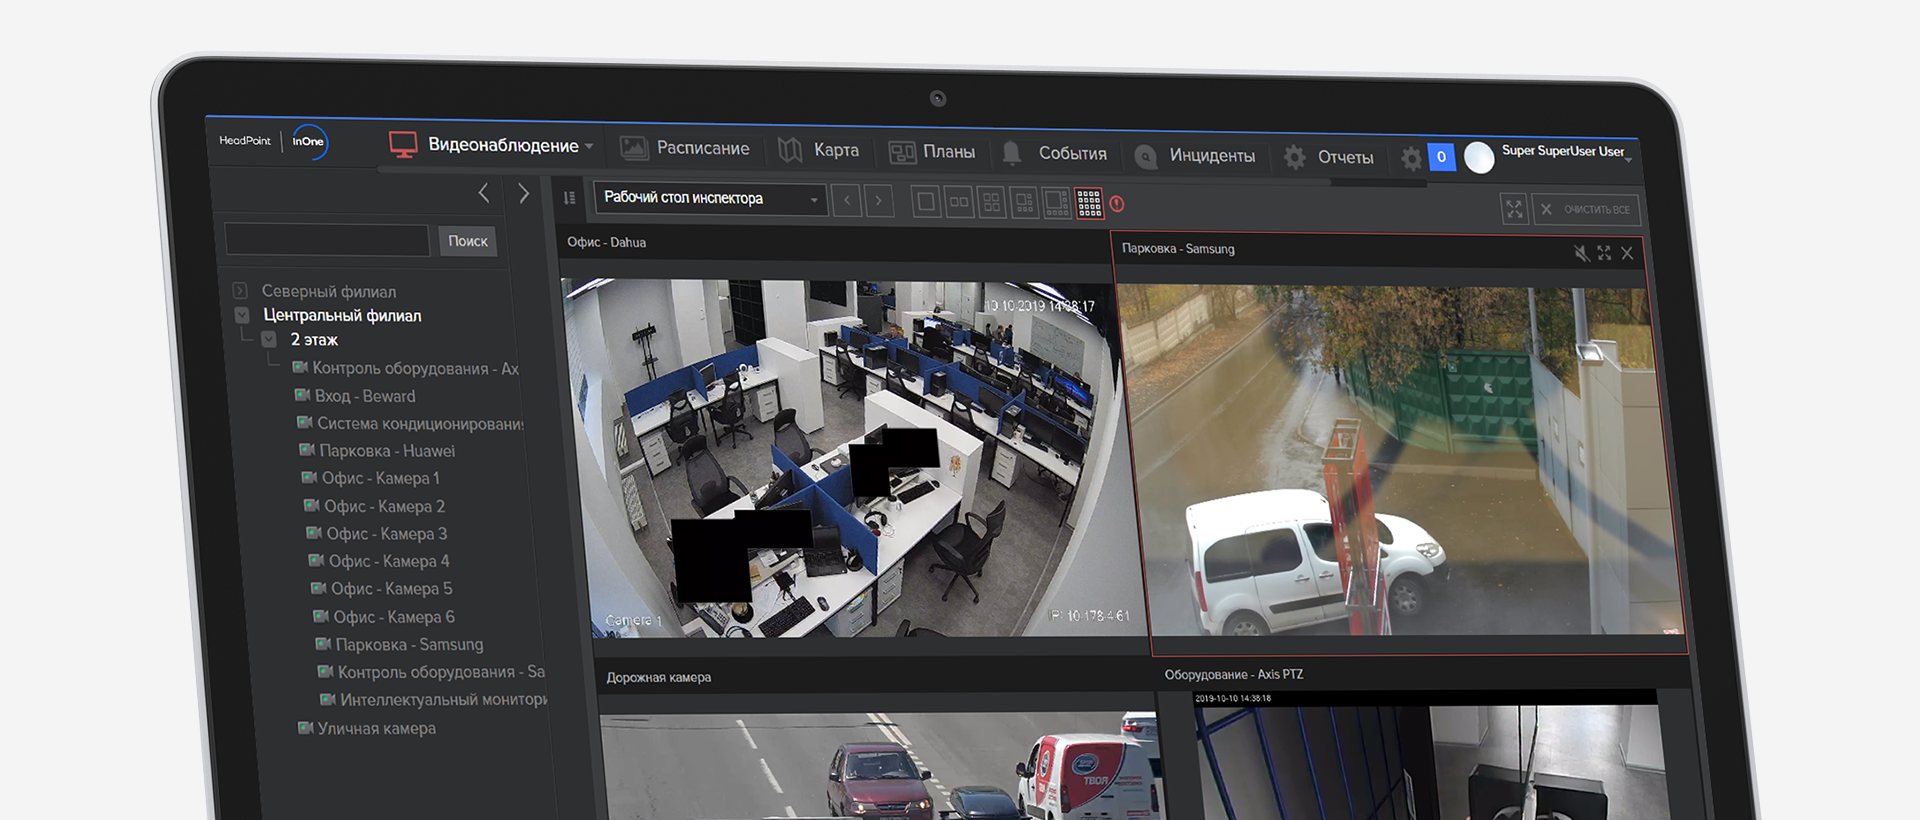 InOne. Unified Video Surveillance System